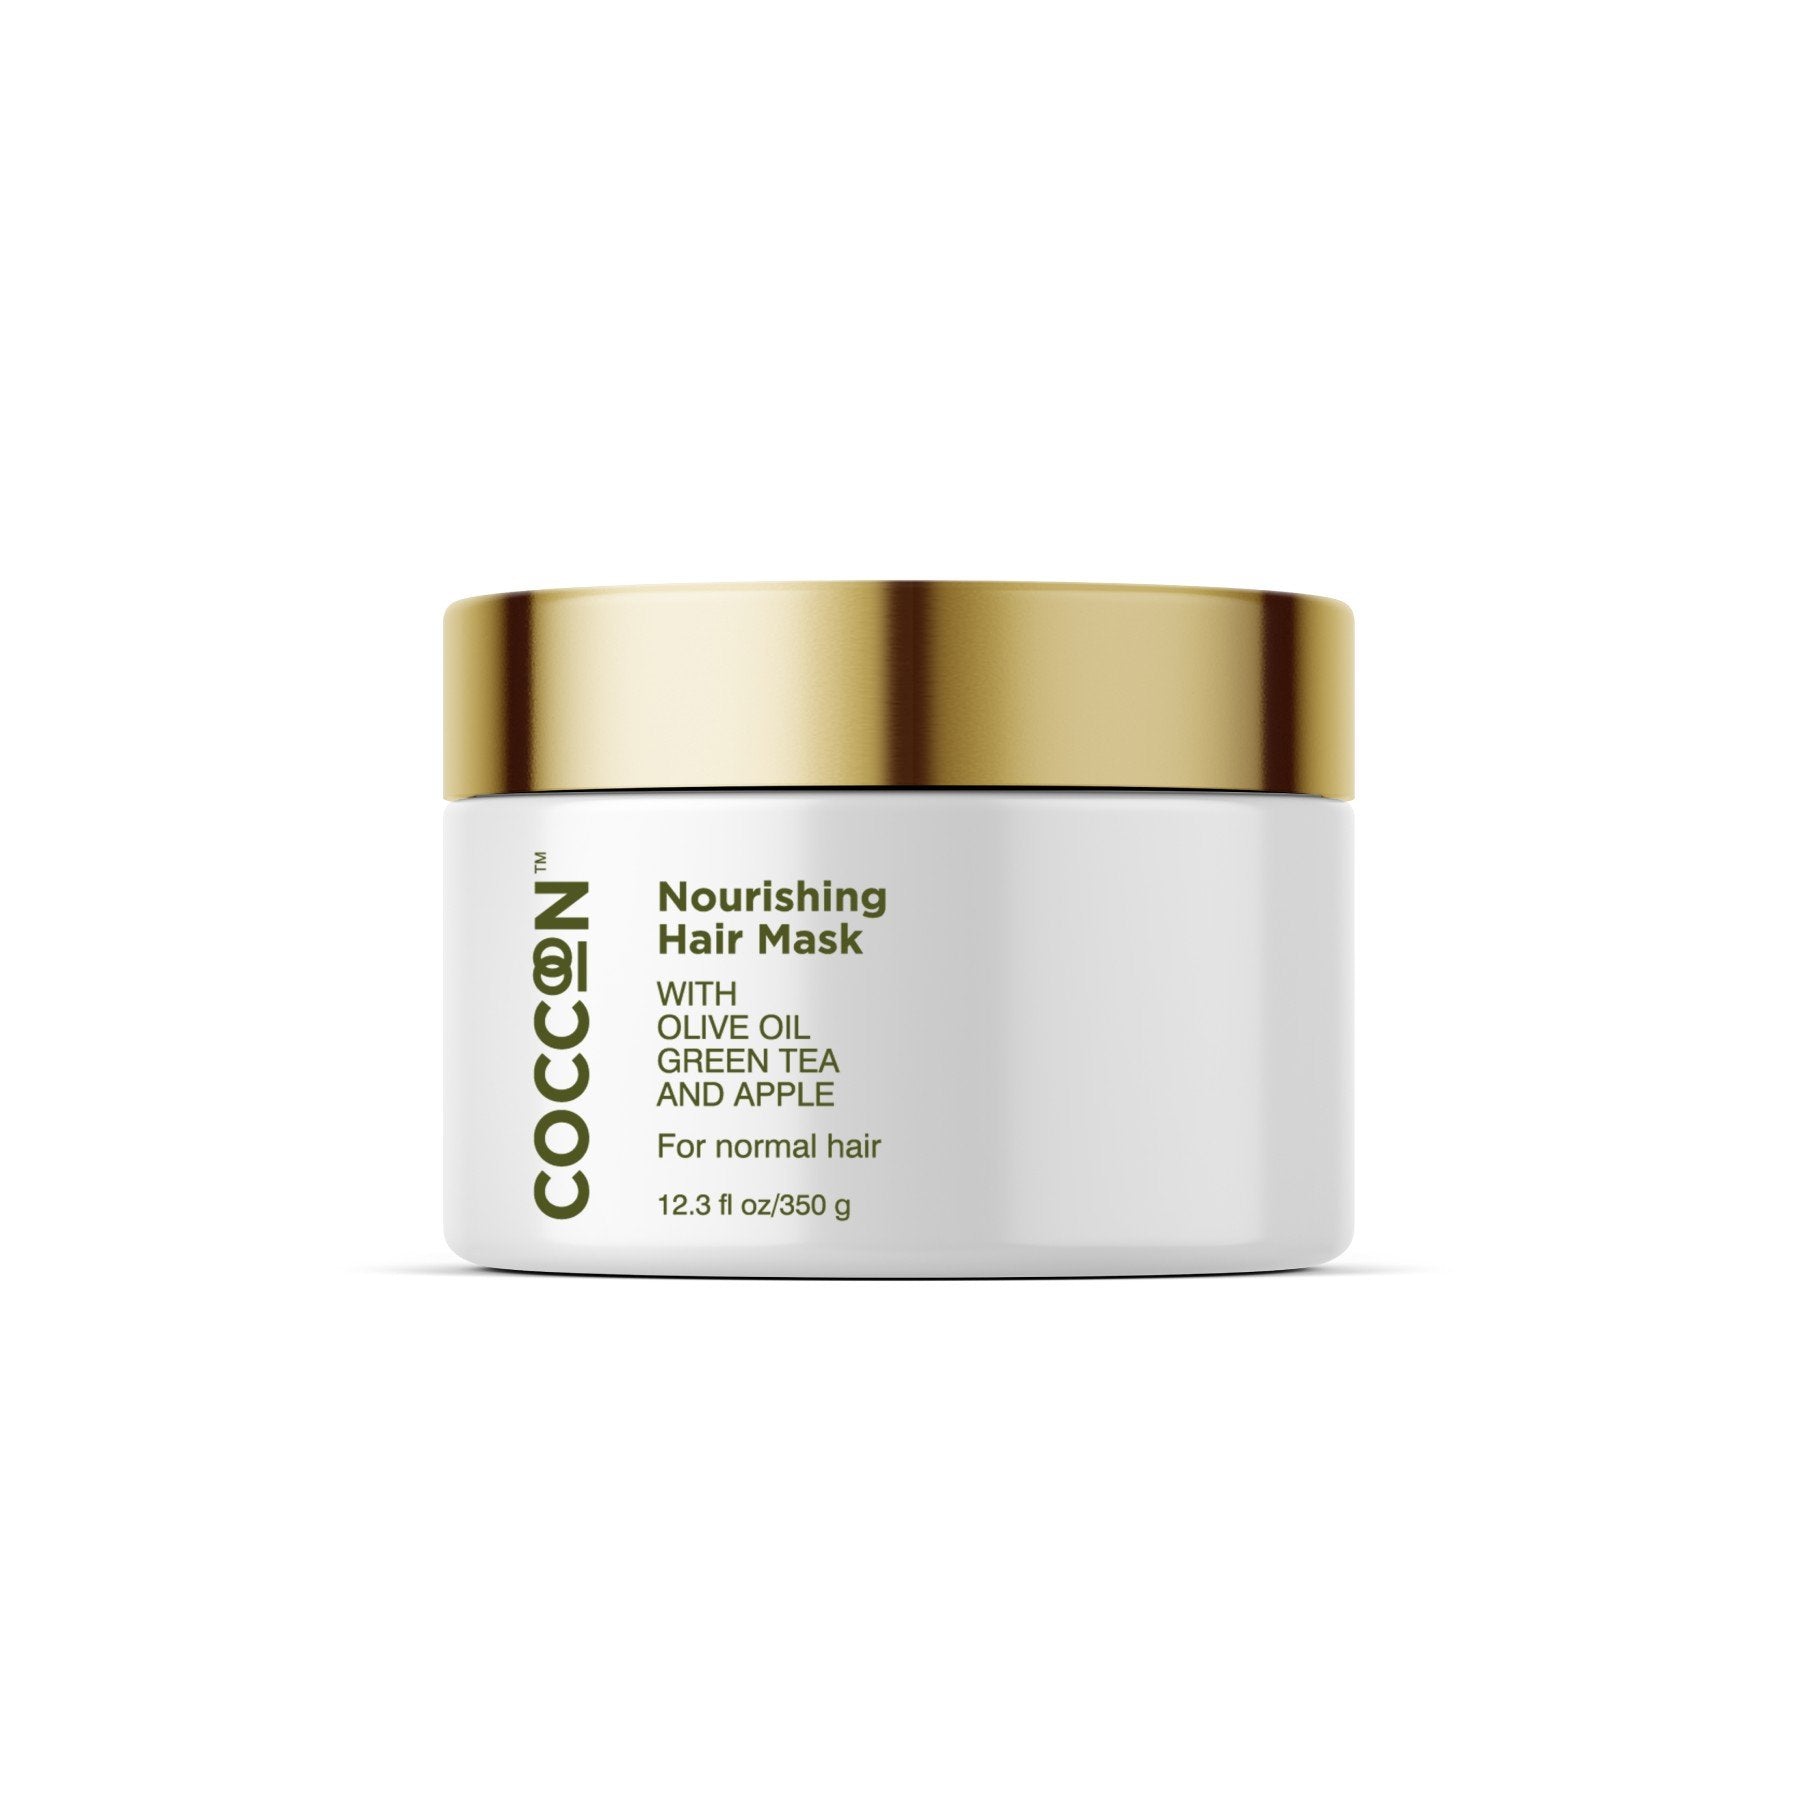 Shop Nourishing Hair Mask  from Coccoon on SublimeLife.in. Best for strengthening your hair and gives it a shine.